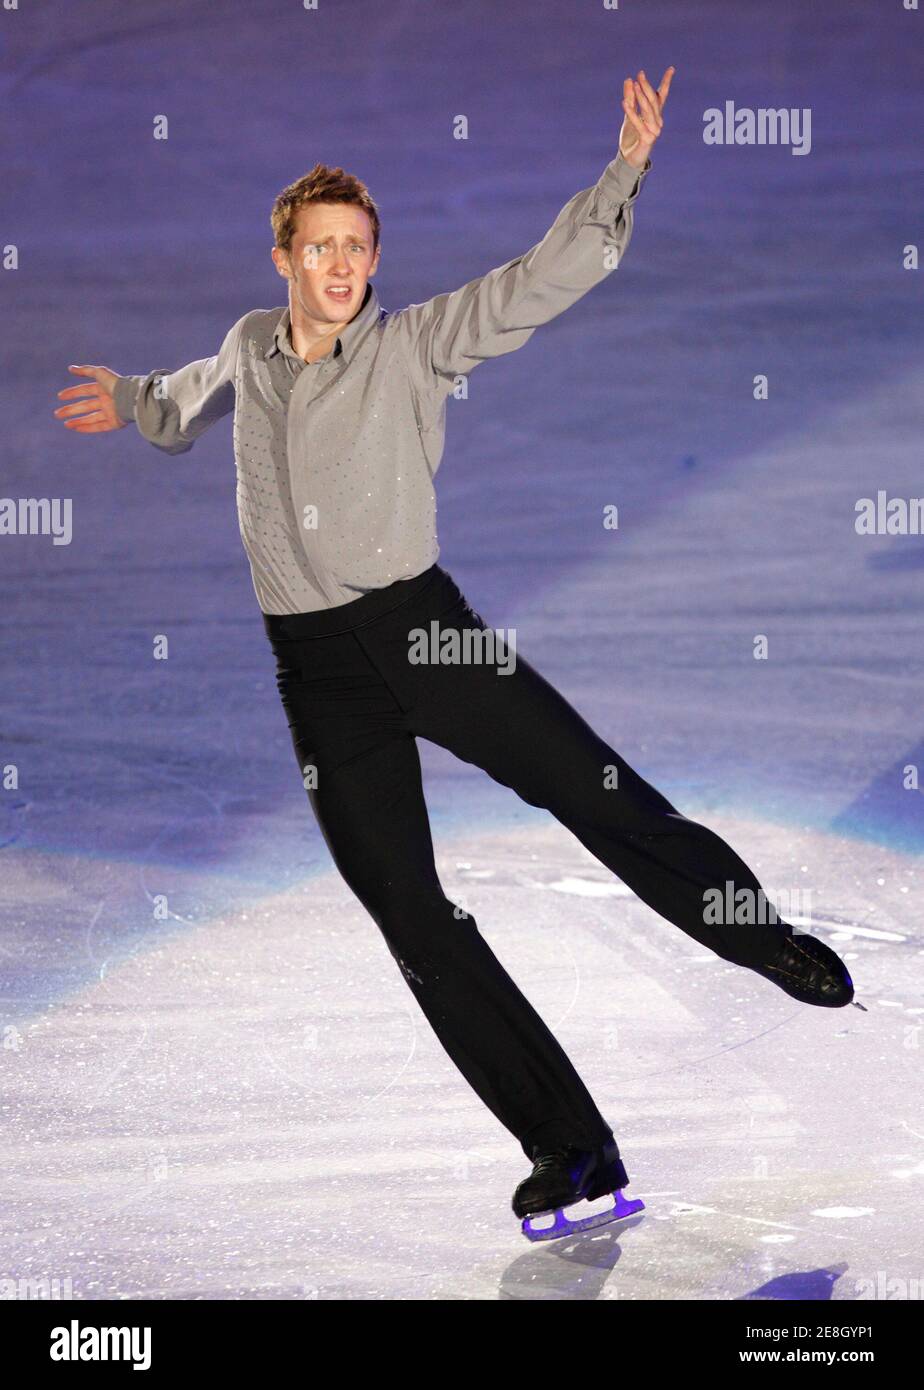 Figure skater Jeremy Abbott from the U.S. performs during the '2010 All That Skate Summer' ice show in Goyang, near Seoul July 23, 2010.  REUTERS/Jo Yong-Hak (SOUTH KOREA - Tags: SPORT FIGURE SKATING) Stock Photo